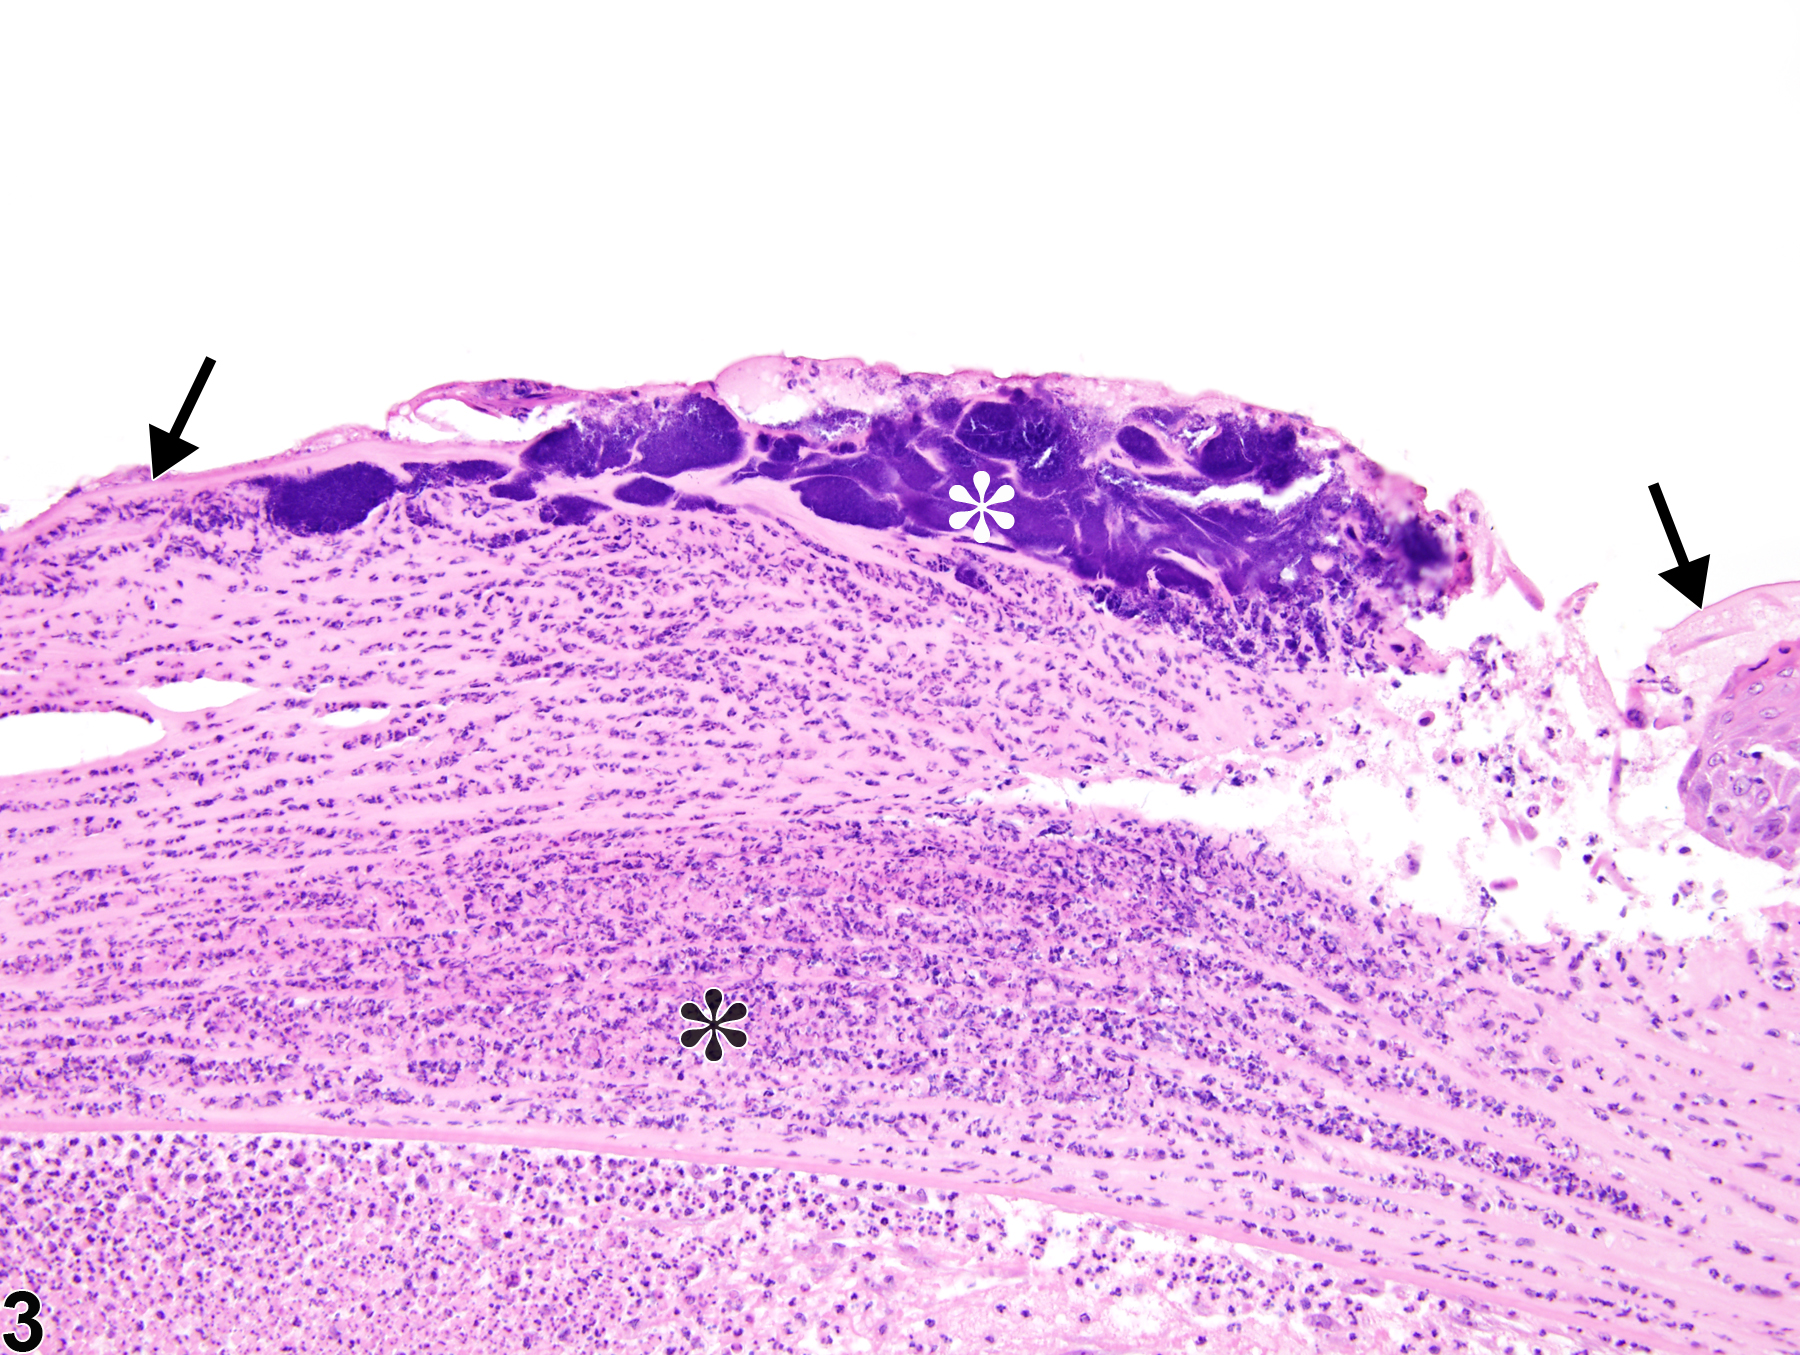 Image of cornea ulcer in the eye from a male F344/N rat in a subchronic study